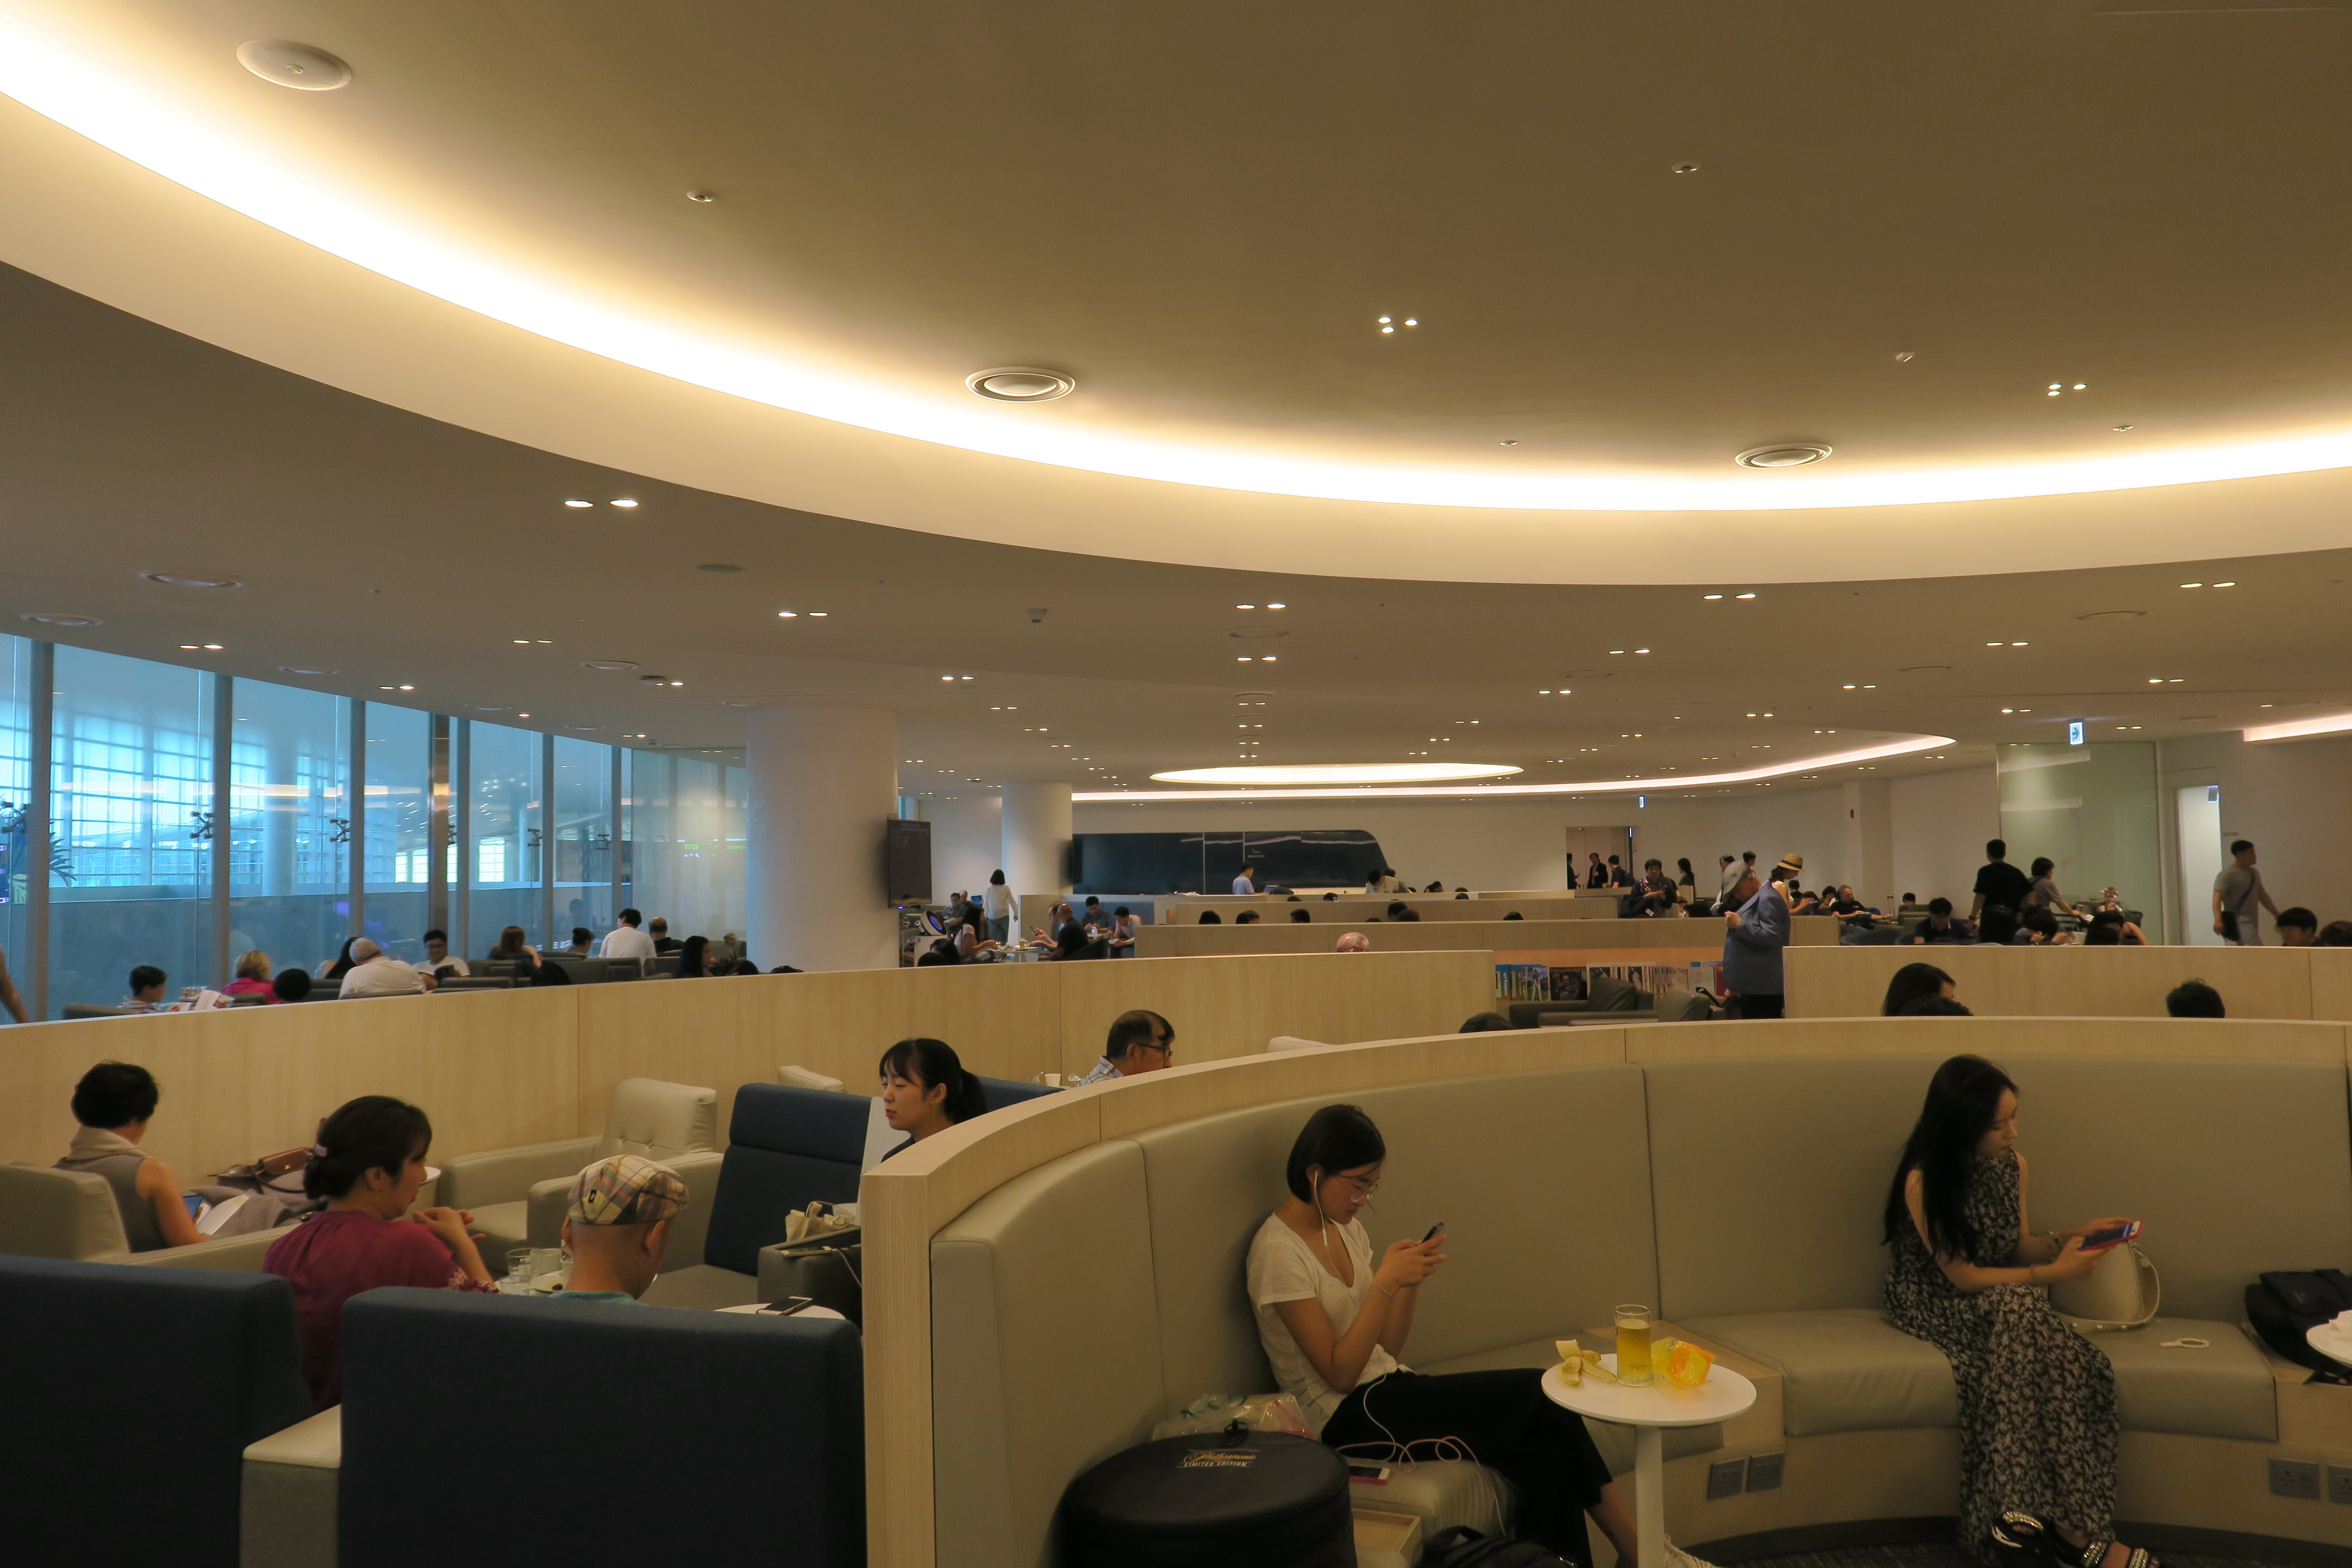 people sitting at tables in a large room